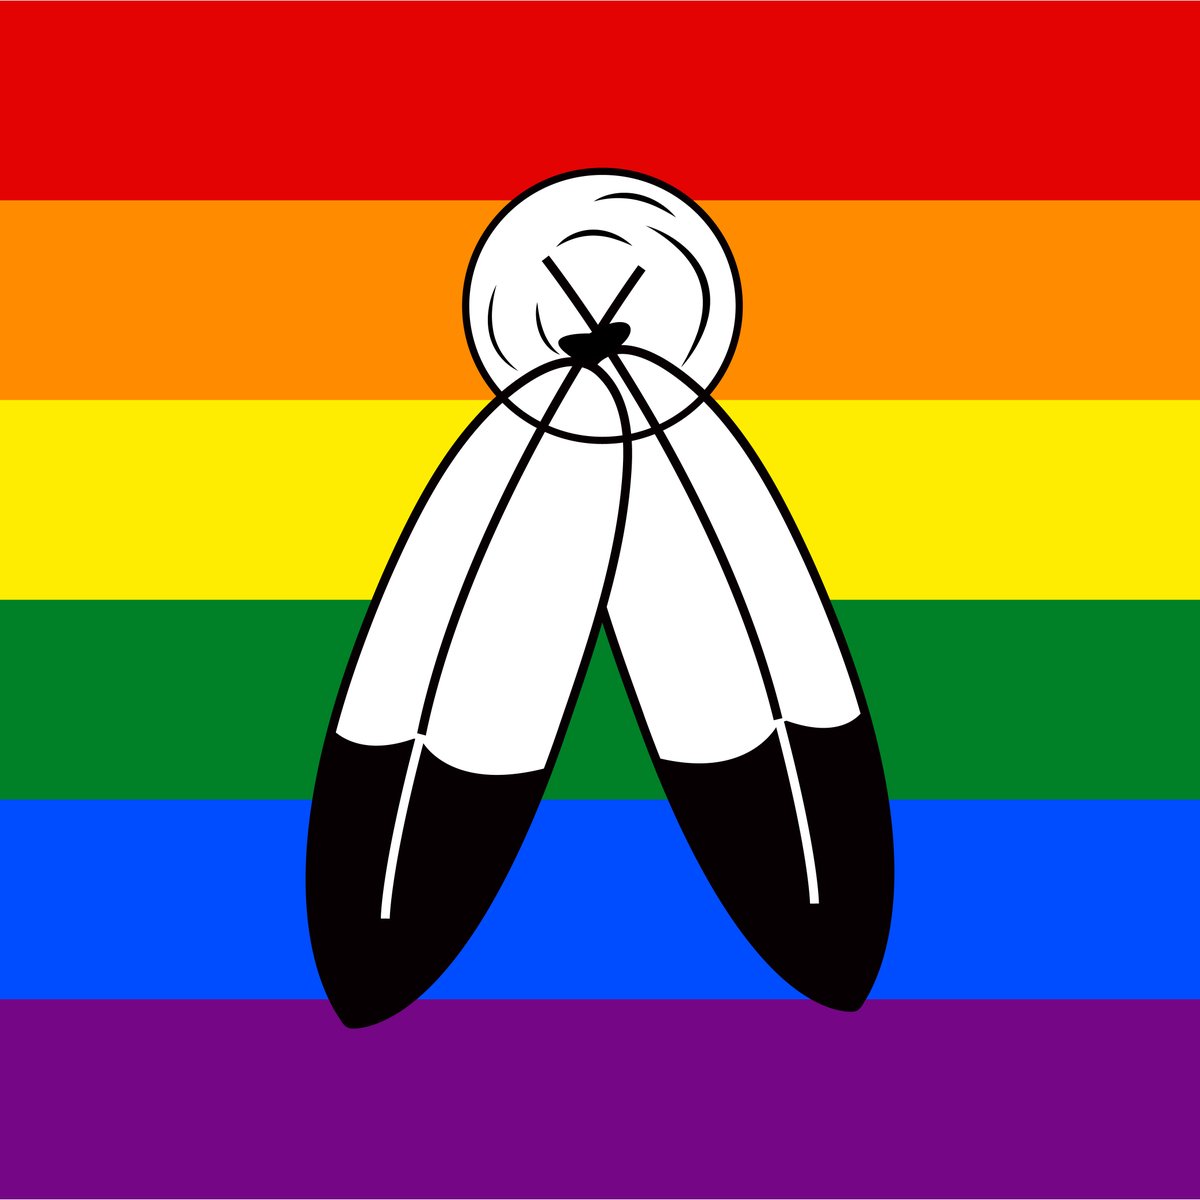 Join the Proclamation of Two-Spirit & Indigenous LGBTQIA+ Celebration and Awareness Day on Monday, March 20, 2023 – in alignment with the spring equinox.
Bannock & Tea, 2 pm – 7 pm
The Junction (1138 Davie Street, Vancouver)
Everyone is welcome!
#2SCelebrationDay